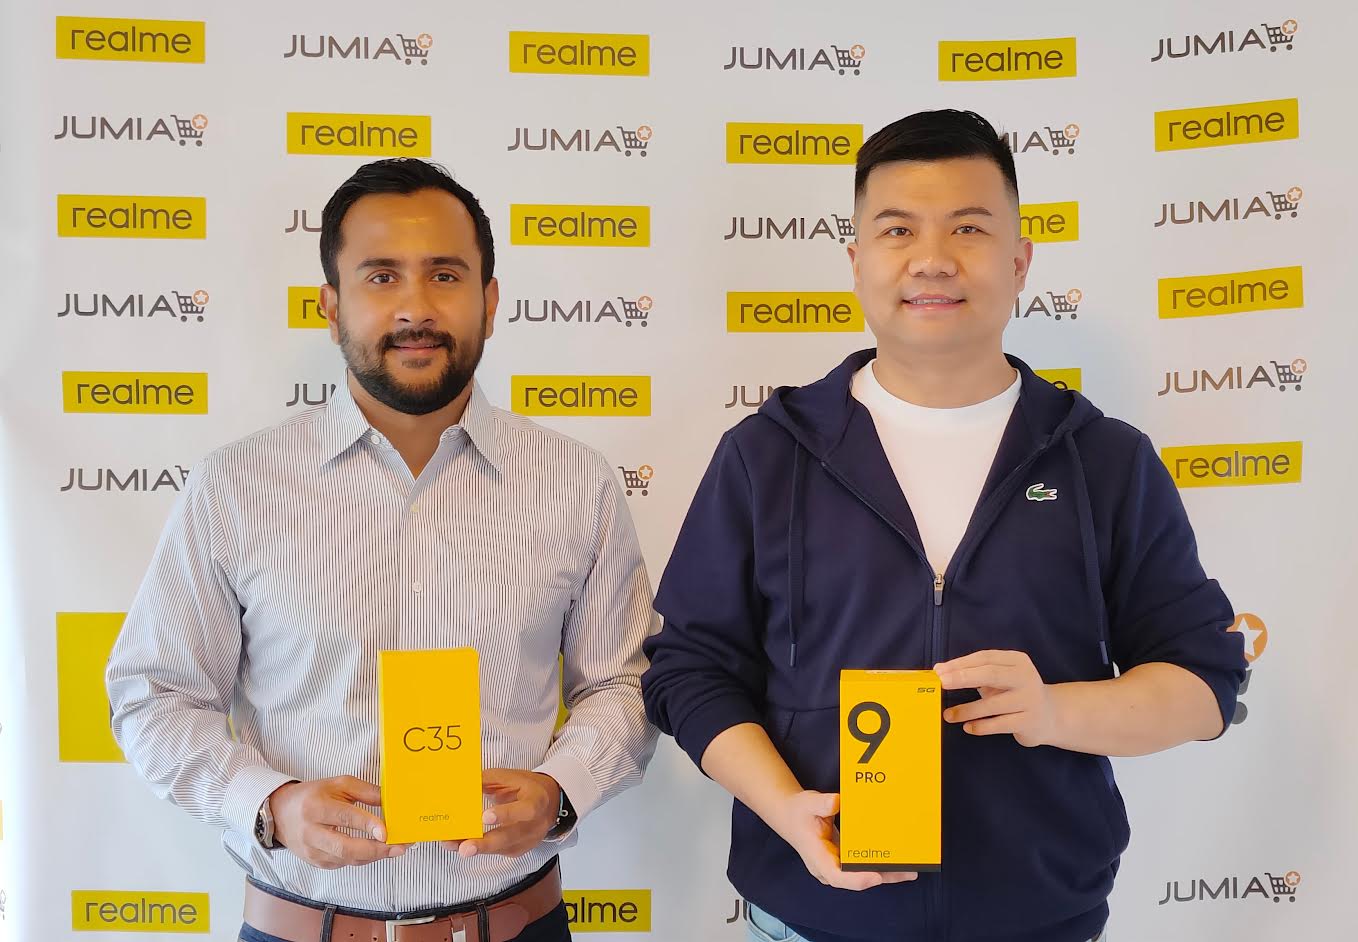 realme and Jumia join forces to boost smartphone adoption in Africa